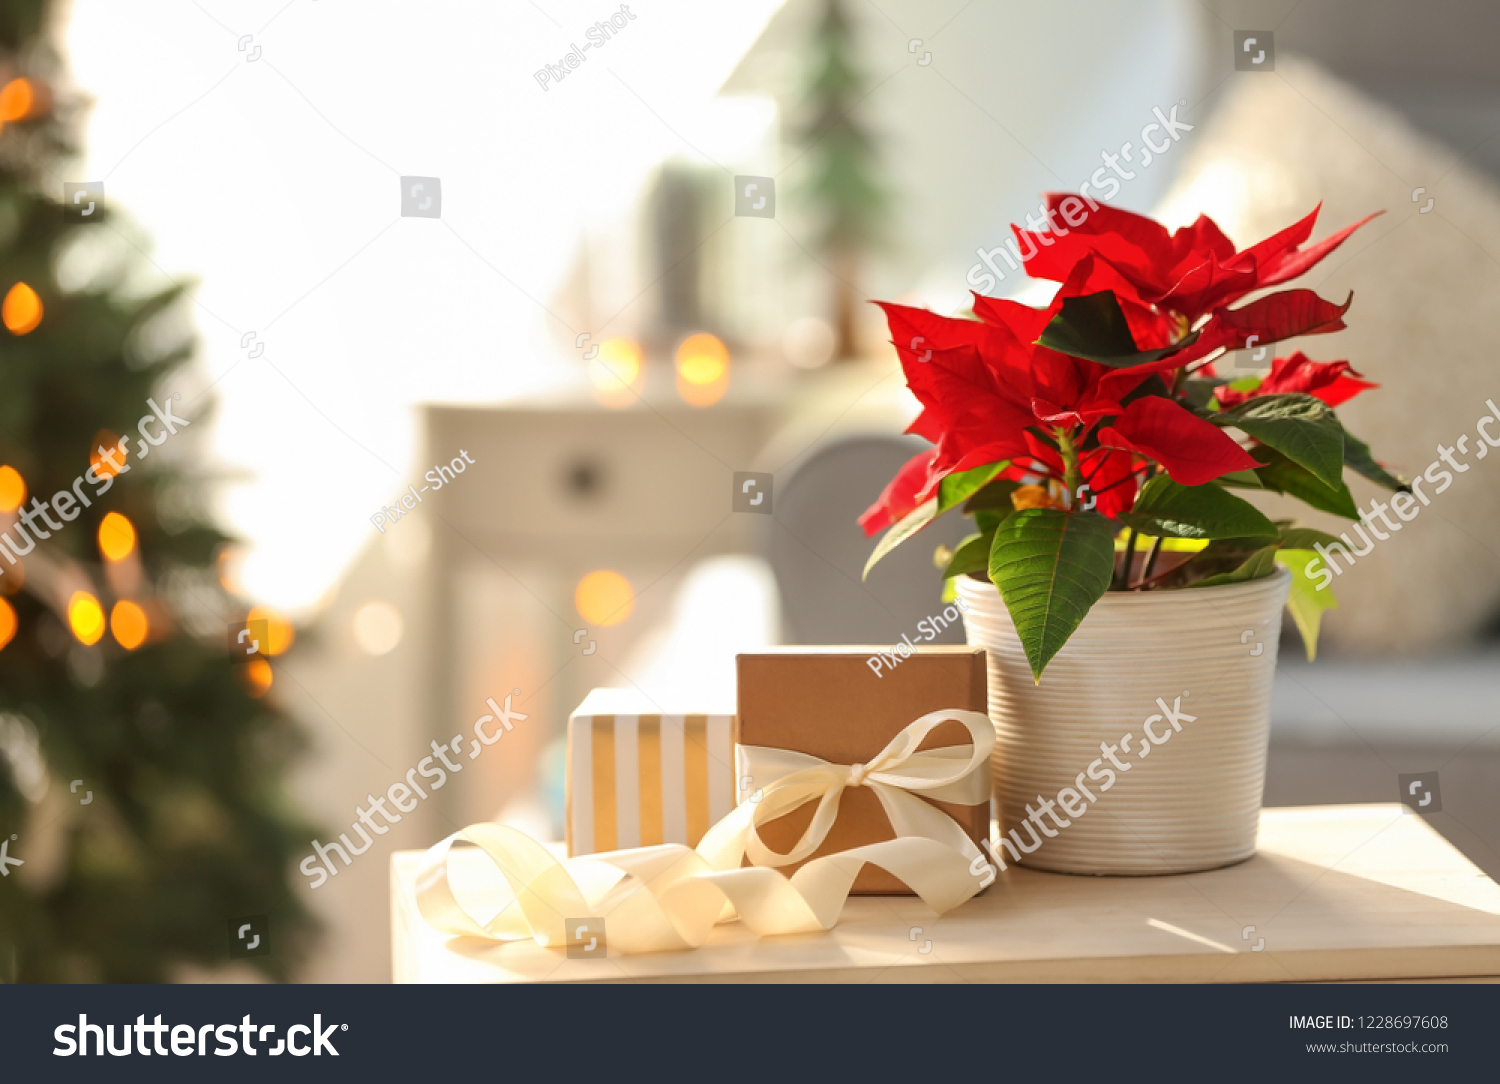 Christmas flower poinsettia with gift boxes on light table #1228697608